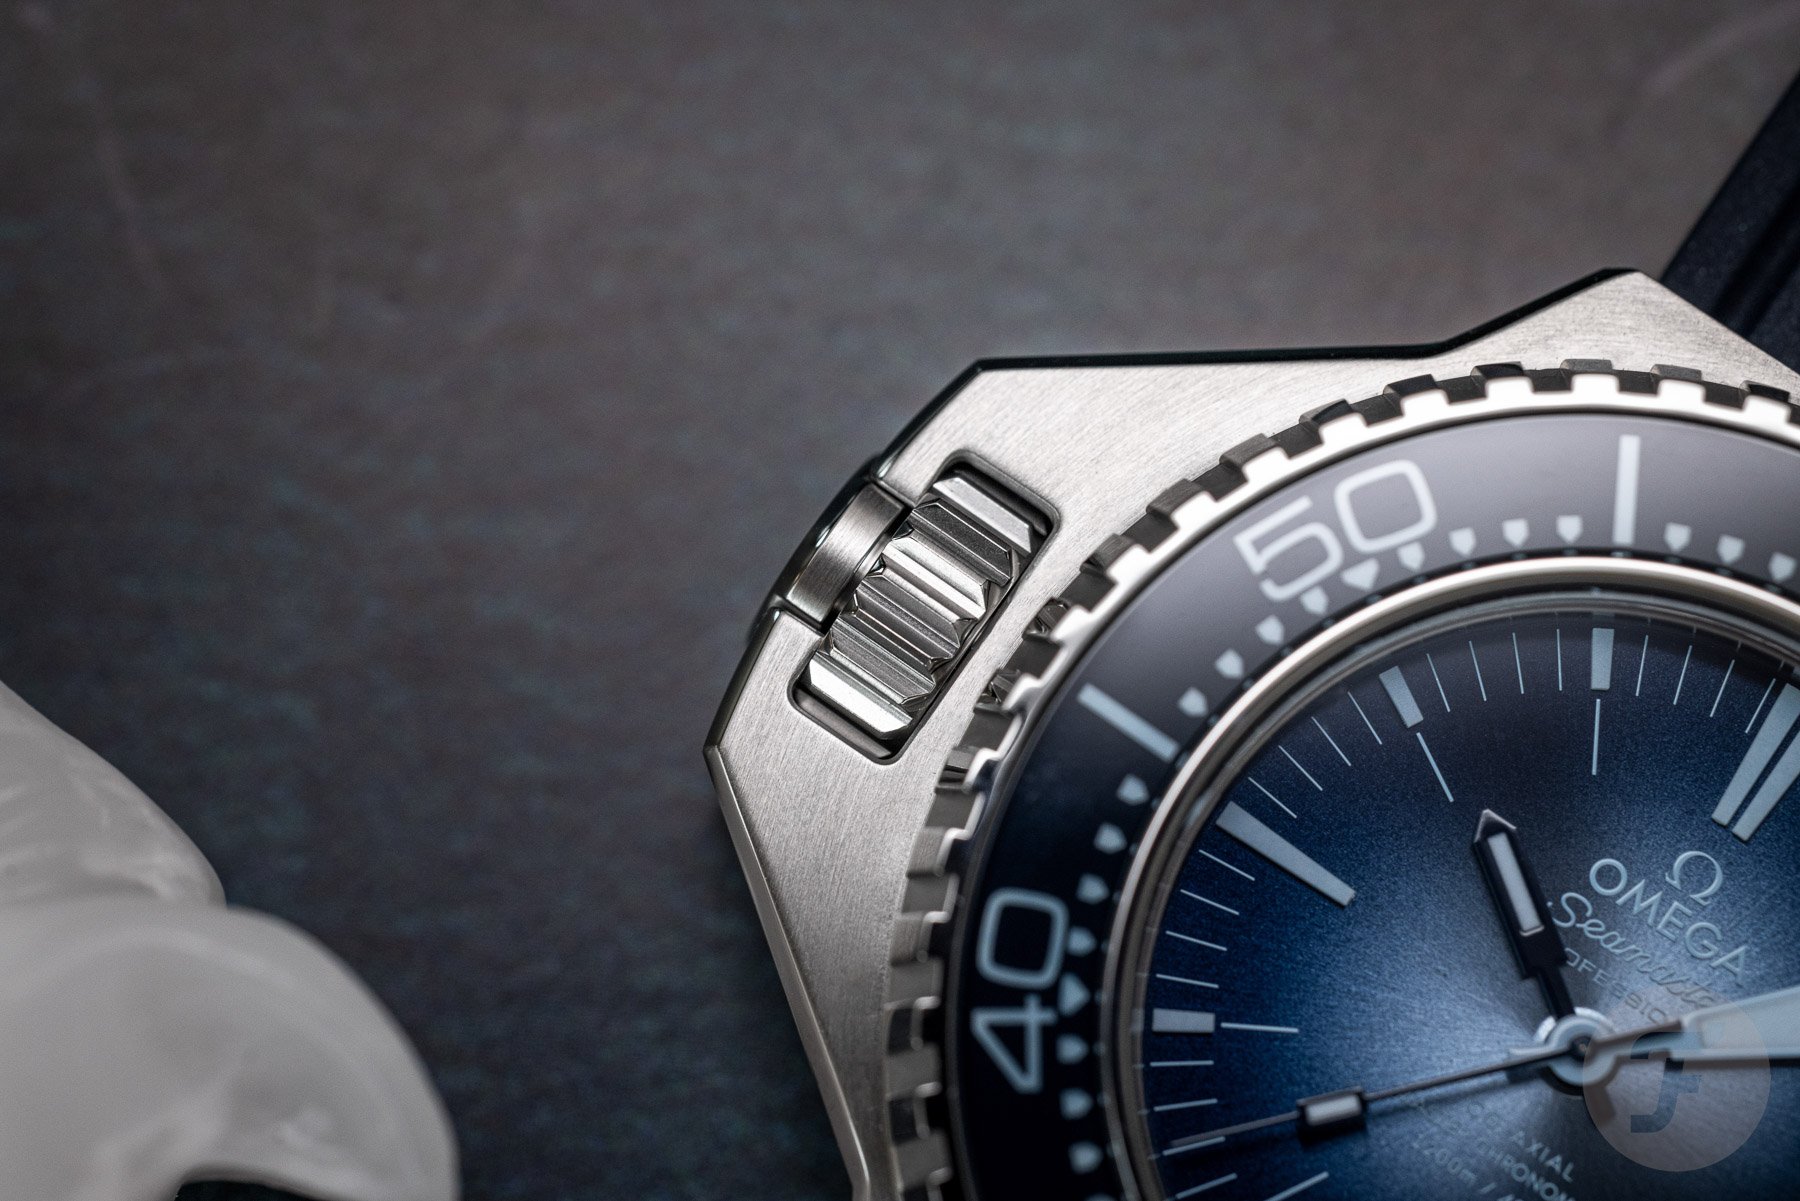 The Best Dive Watches Of 2023 — Fratello’s Top 10 Picks From Blancpain, Longines, Omega, And More